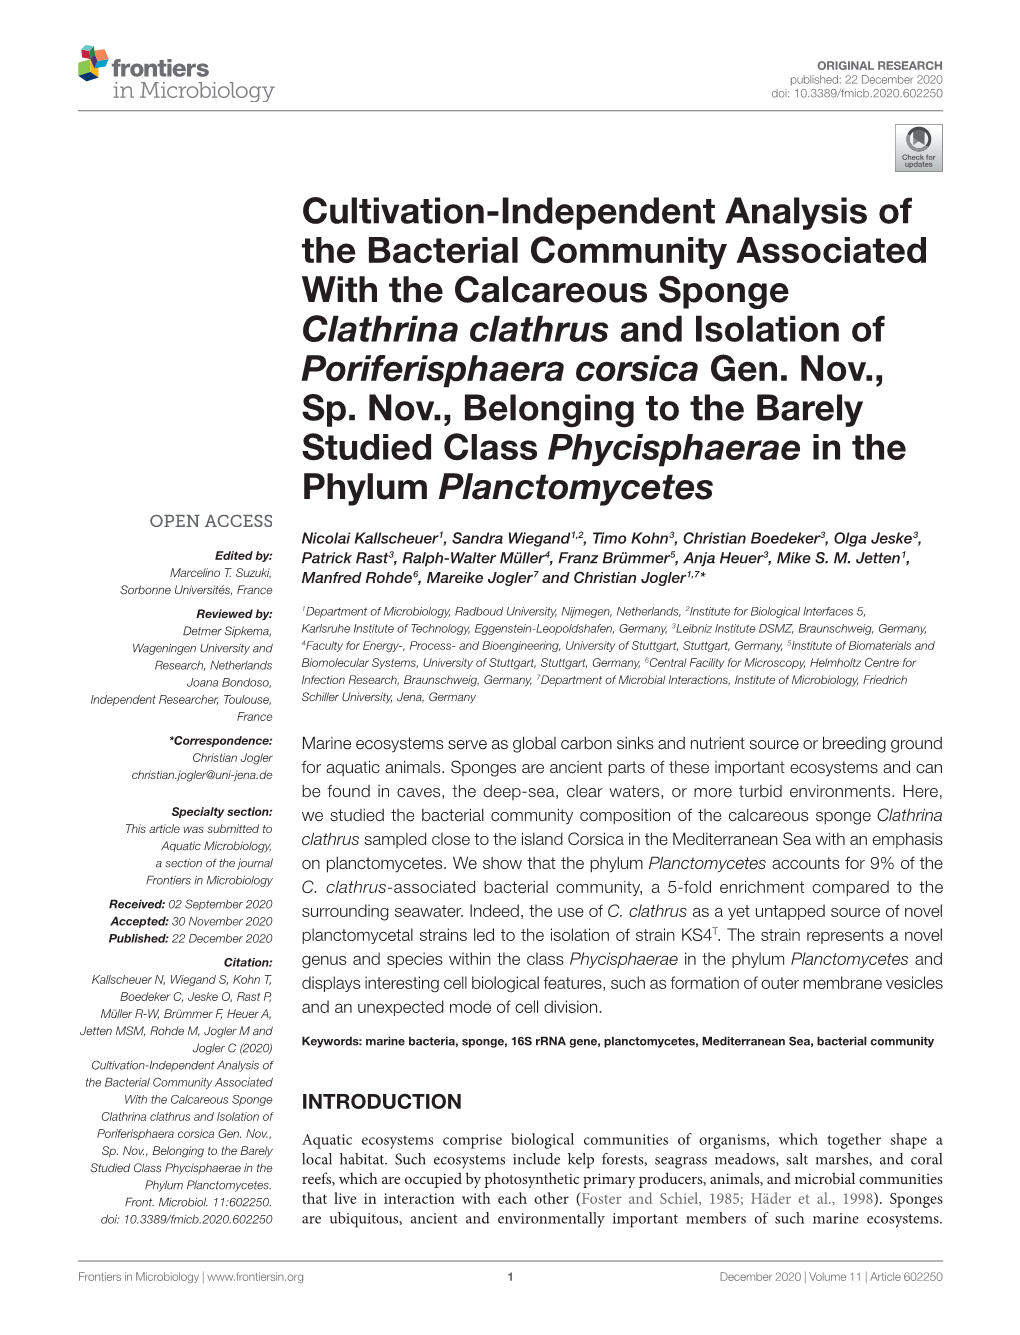 Cultivation-Independent Analysis of the Bacterial Community Associated with the Calcareous Sponge ﻿Clathrina Clathrus﻿ and I